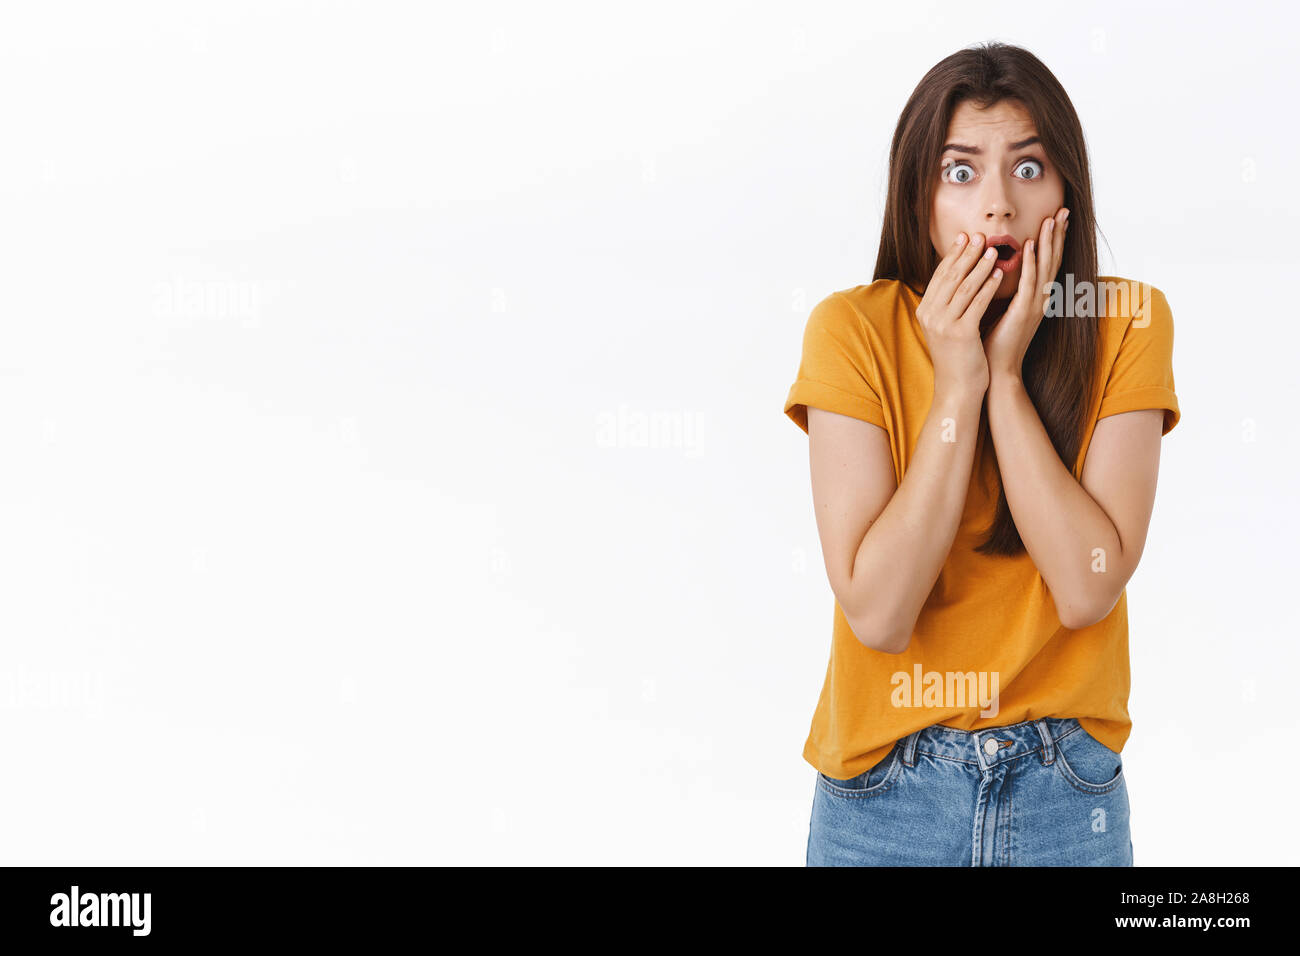 Scared, shocked timid insecure woman standing speechless, drop jaw, gasping stare camera frightened, hear stunning rumours, holding hands on mouth Stock Photo